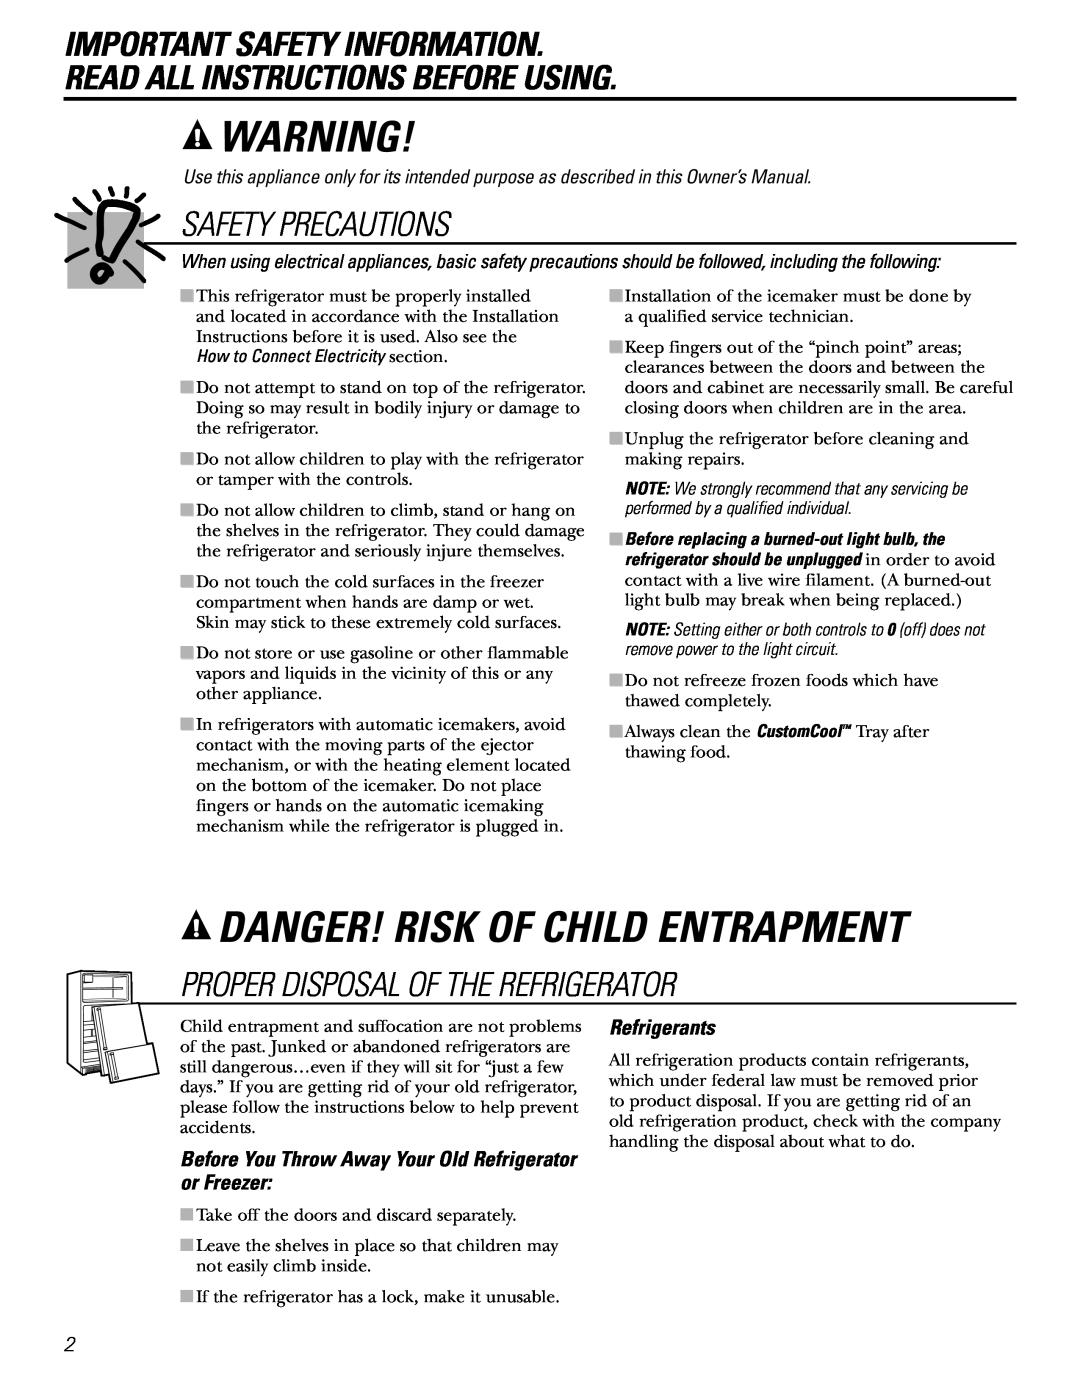 GE 200D2600P031 Danger! Risk Of Child Entrapment, Important Safety Information Read All Instructions Before Using 